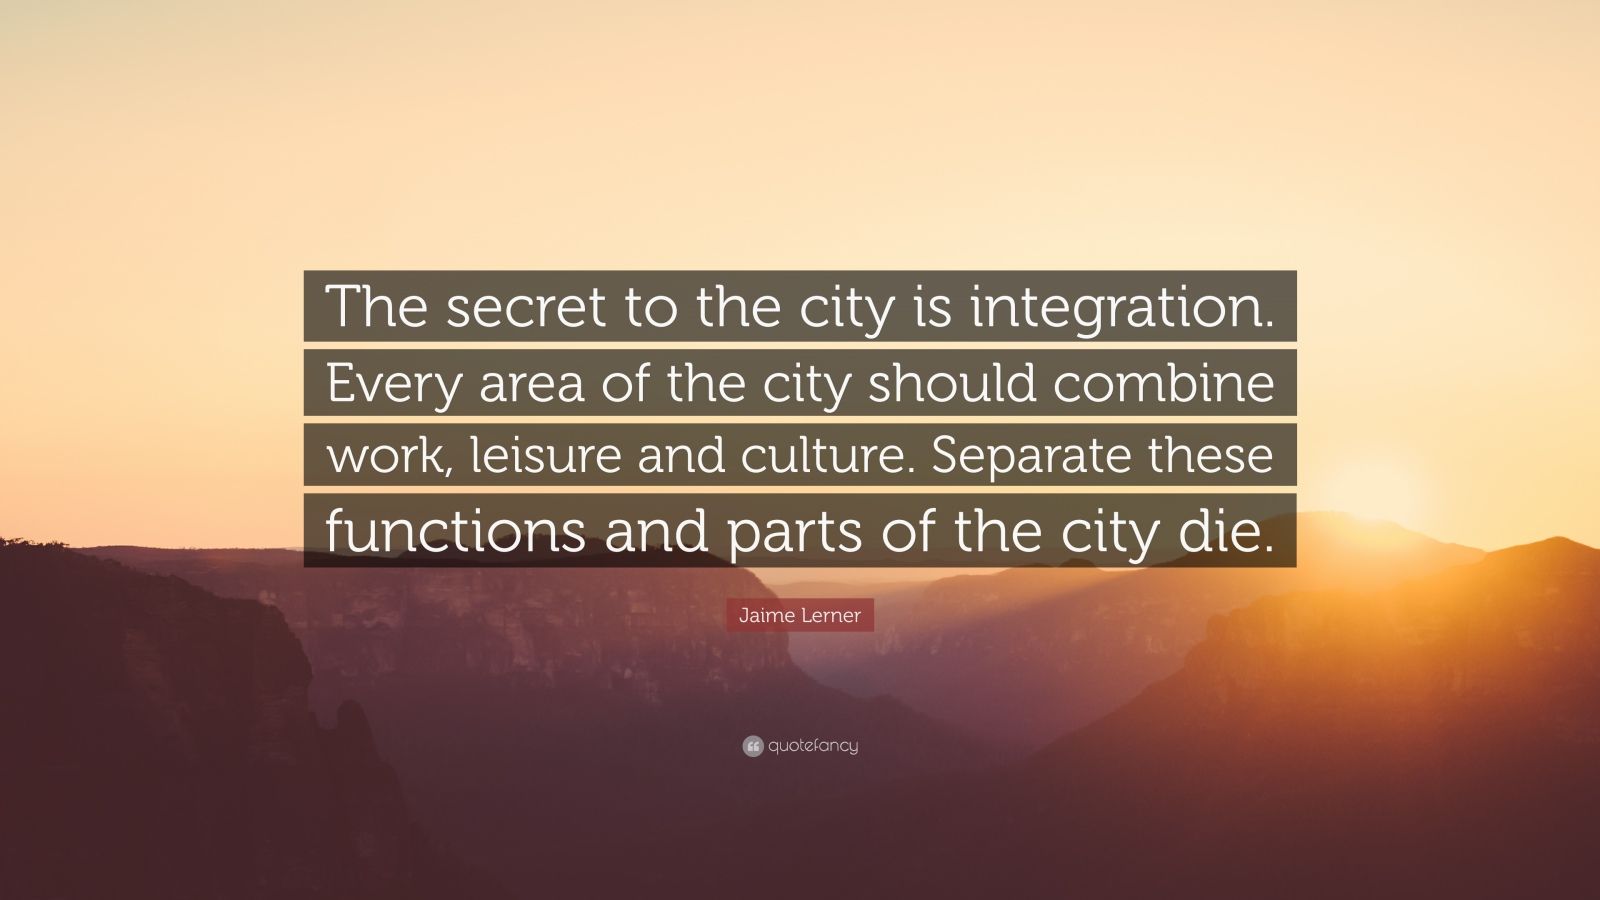 Jaime Lerner Quote: "The secret to the city is integration ...